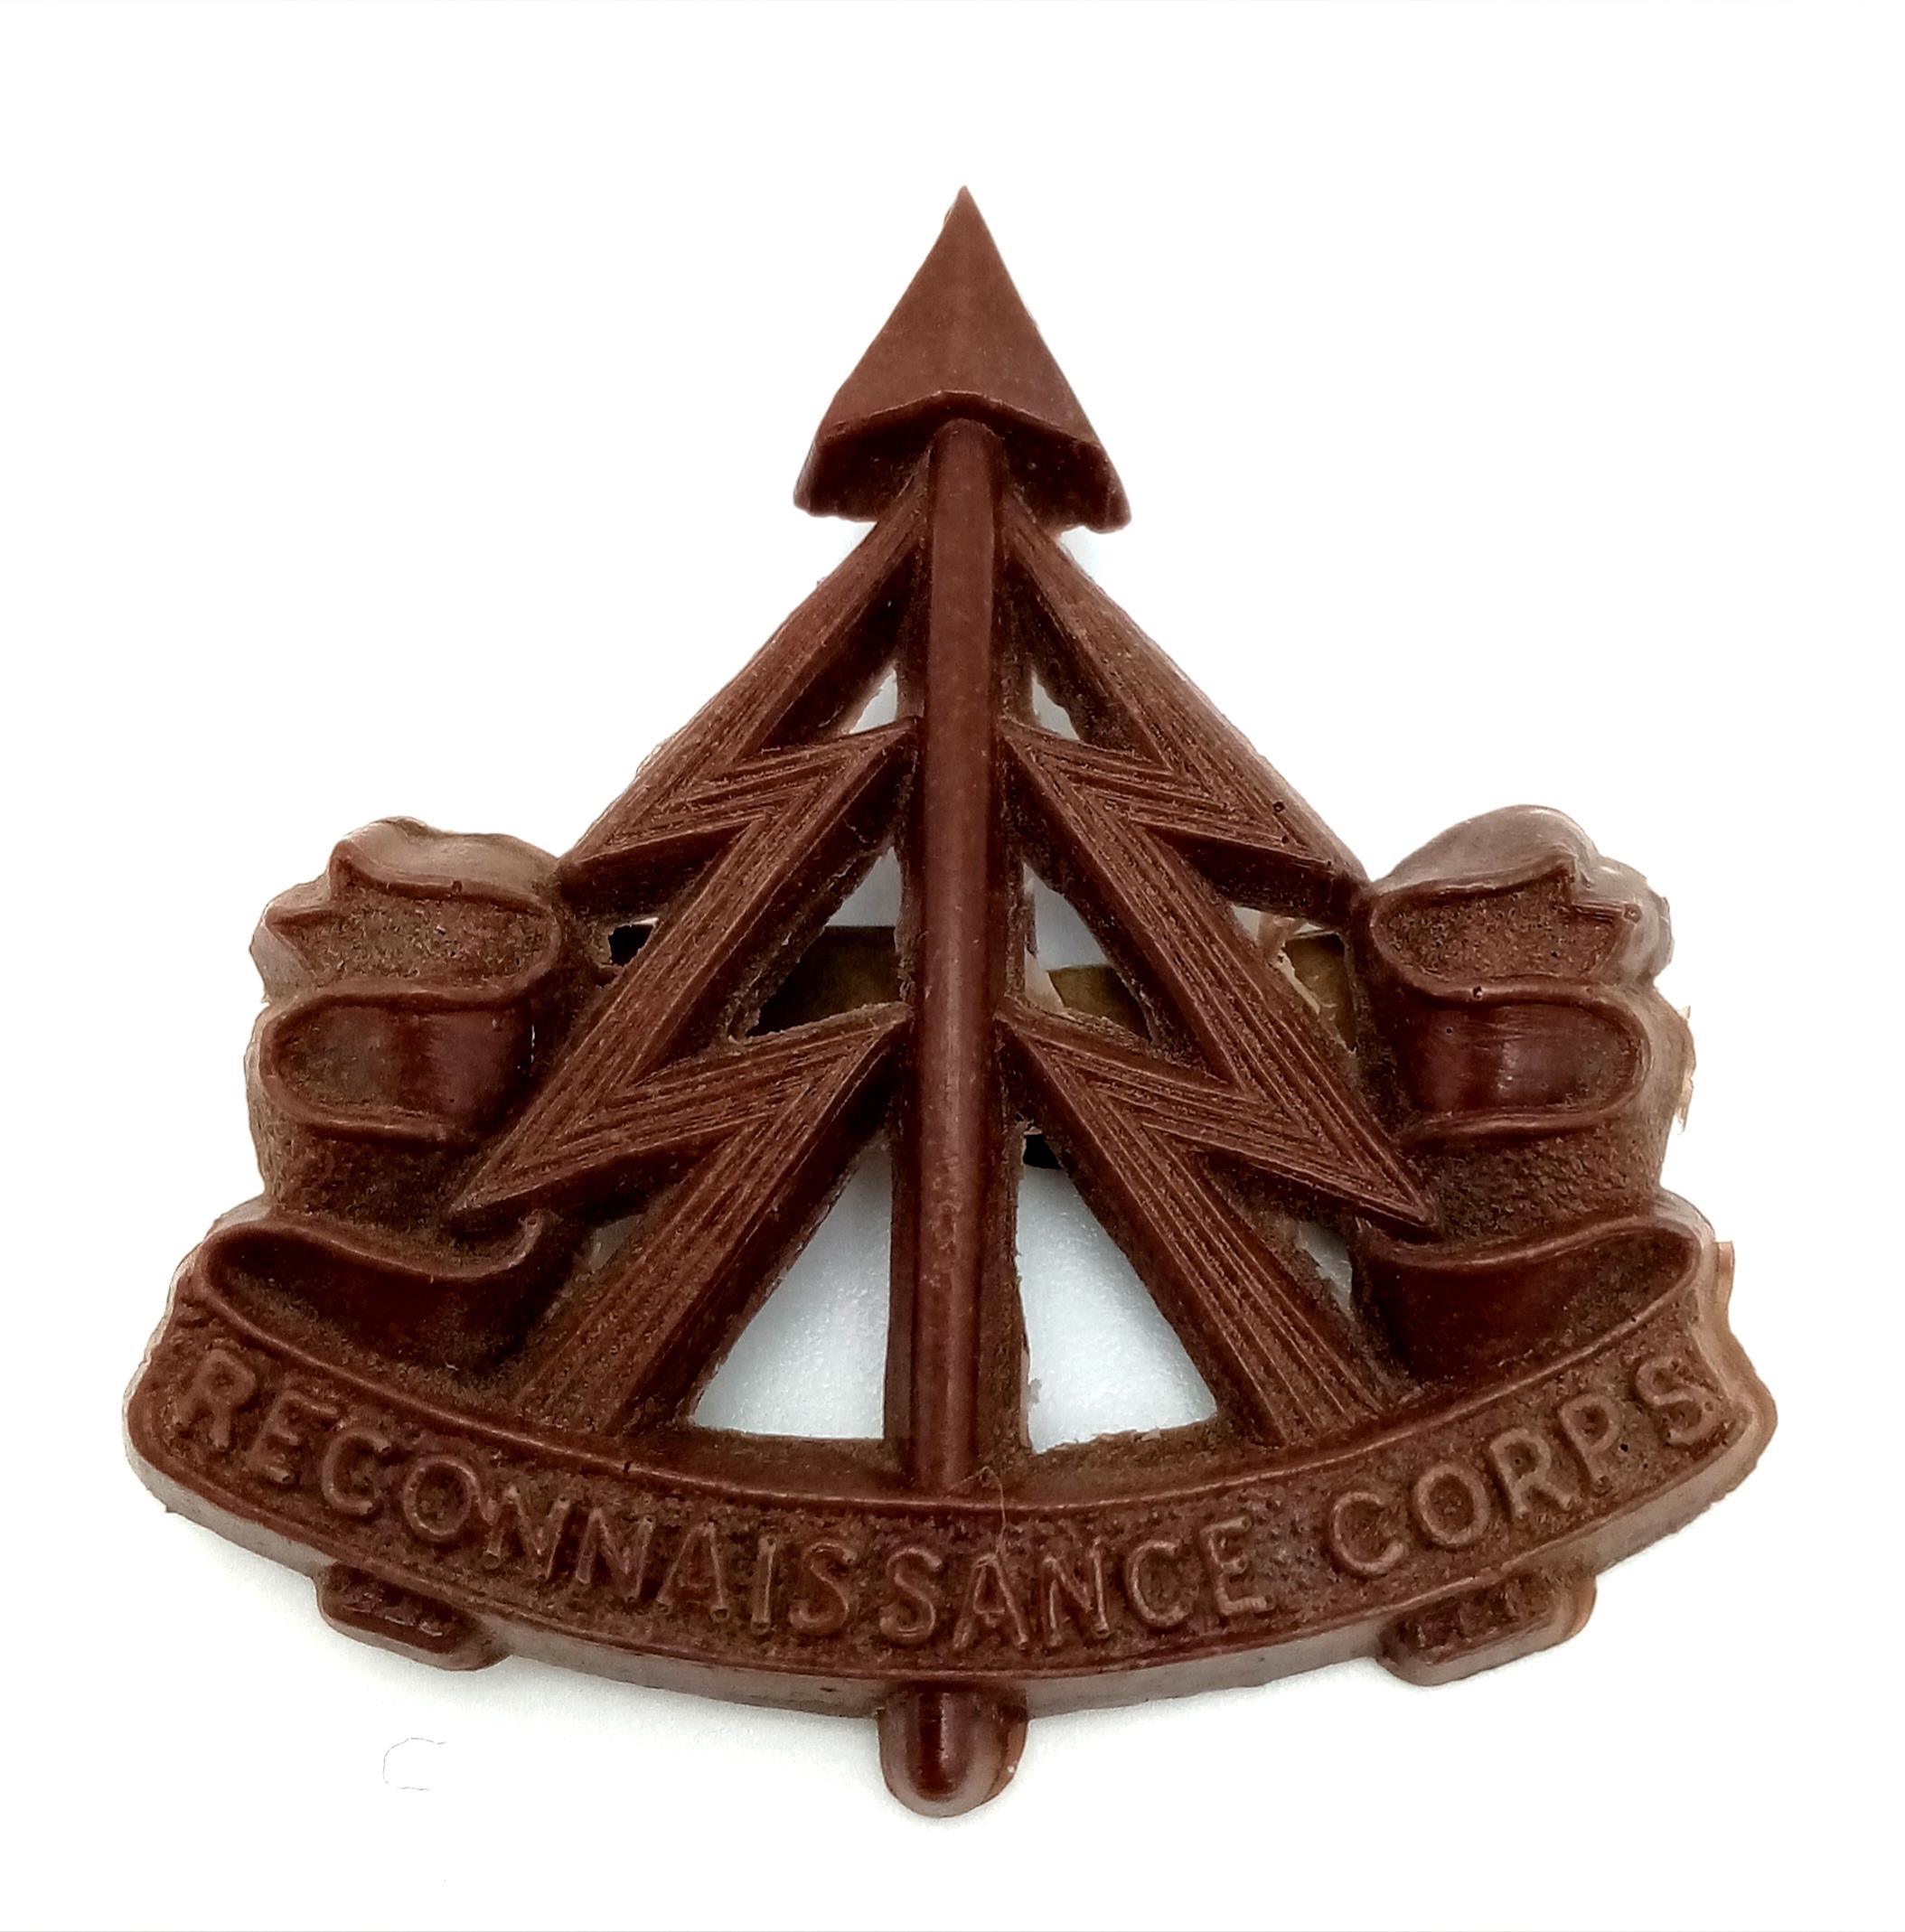 WW2 Plastic (Cellulose Acetate) Economy Issue Reconnaissance Corps Cap Badge. Maker Marked: A.